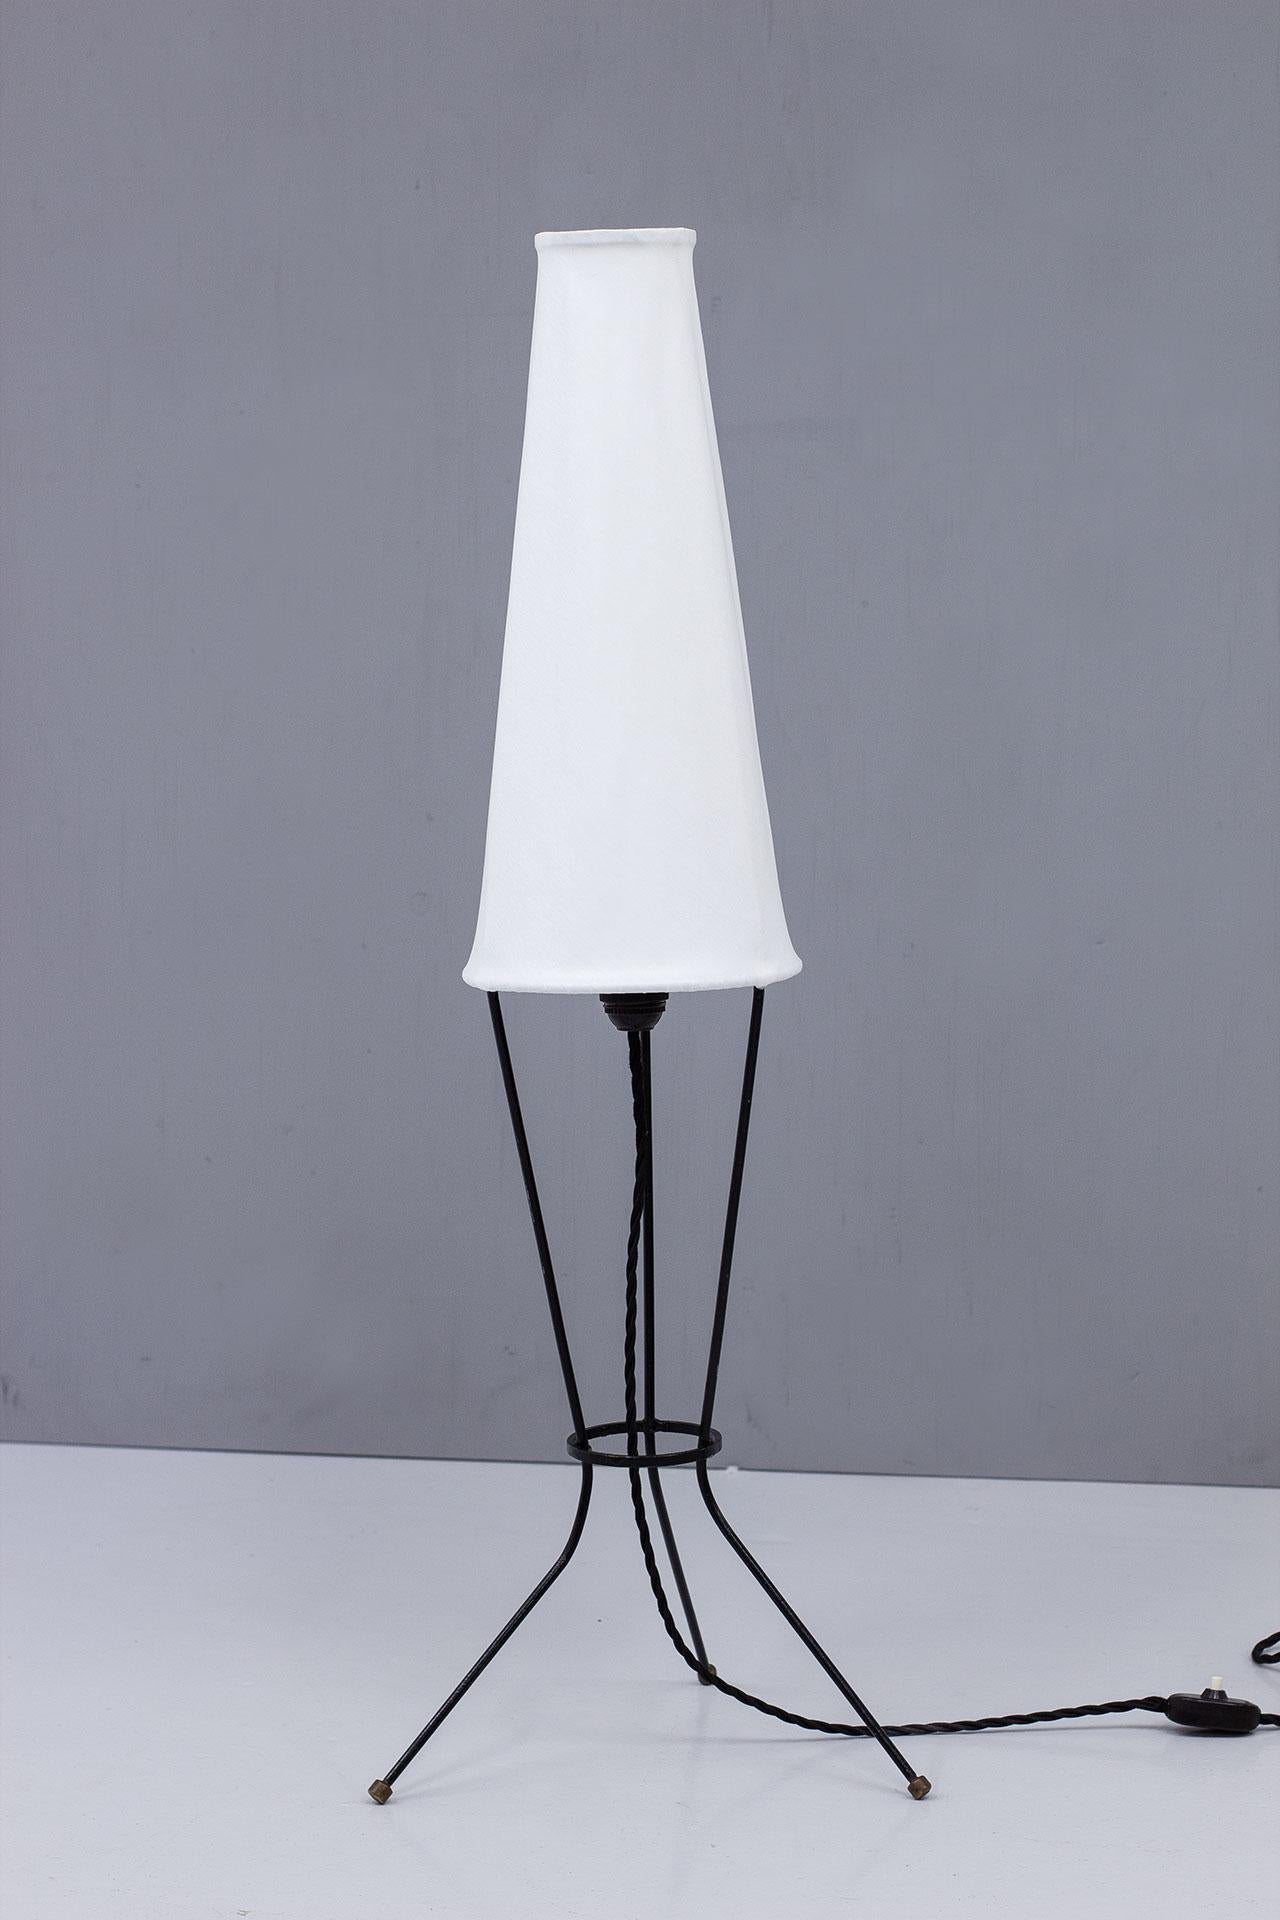 A Swedish Modern Floor / Table Lamp with a height that is in between.
Features a black lacquered metal frame with a newly reupholstered off-white chintz fabric screen. Brass foot enders.
New electricity with a light switch on the chord in working